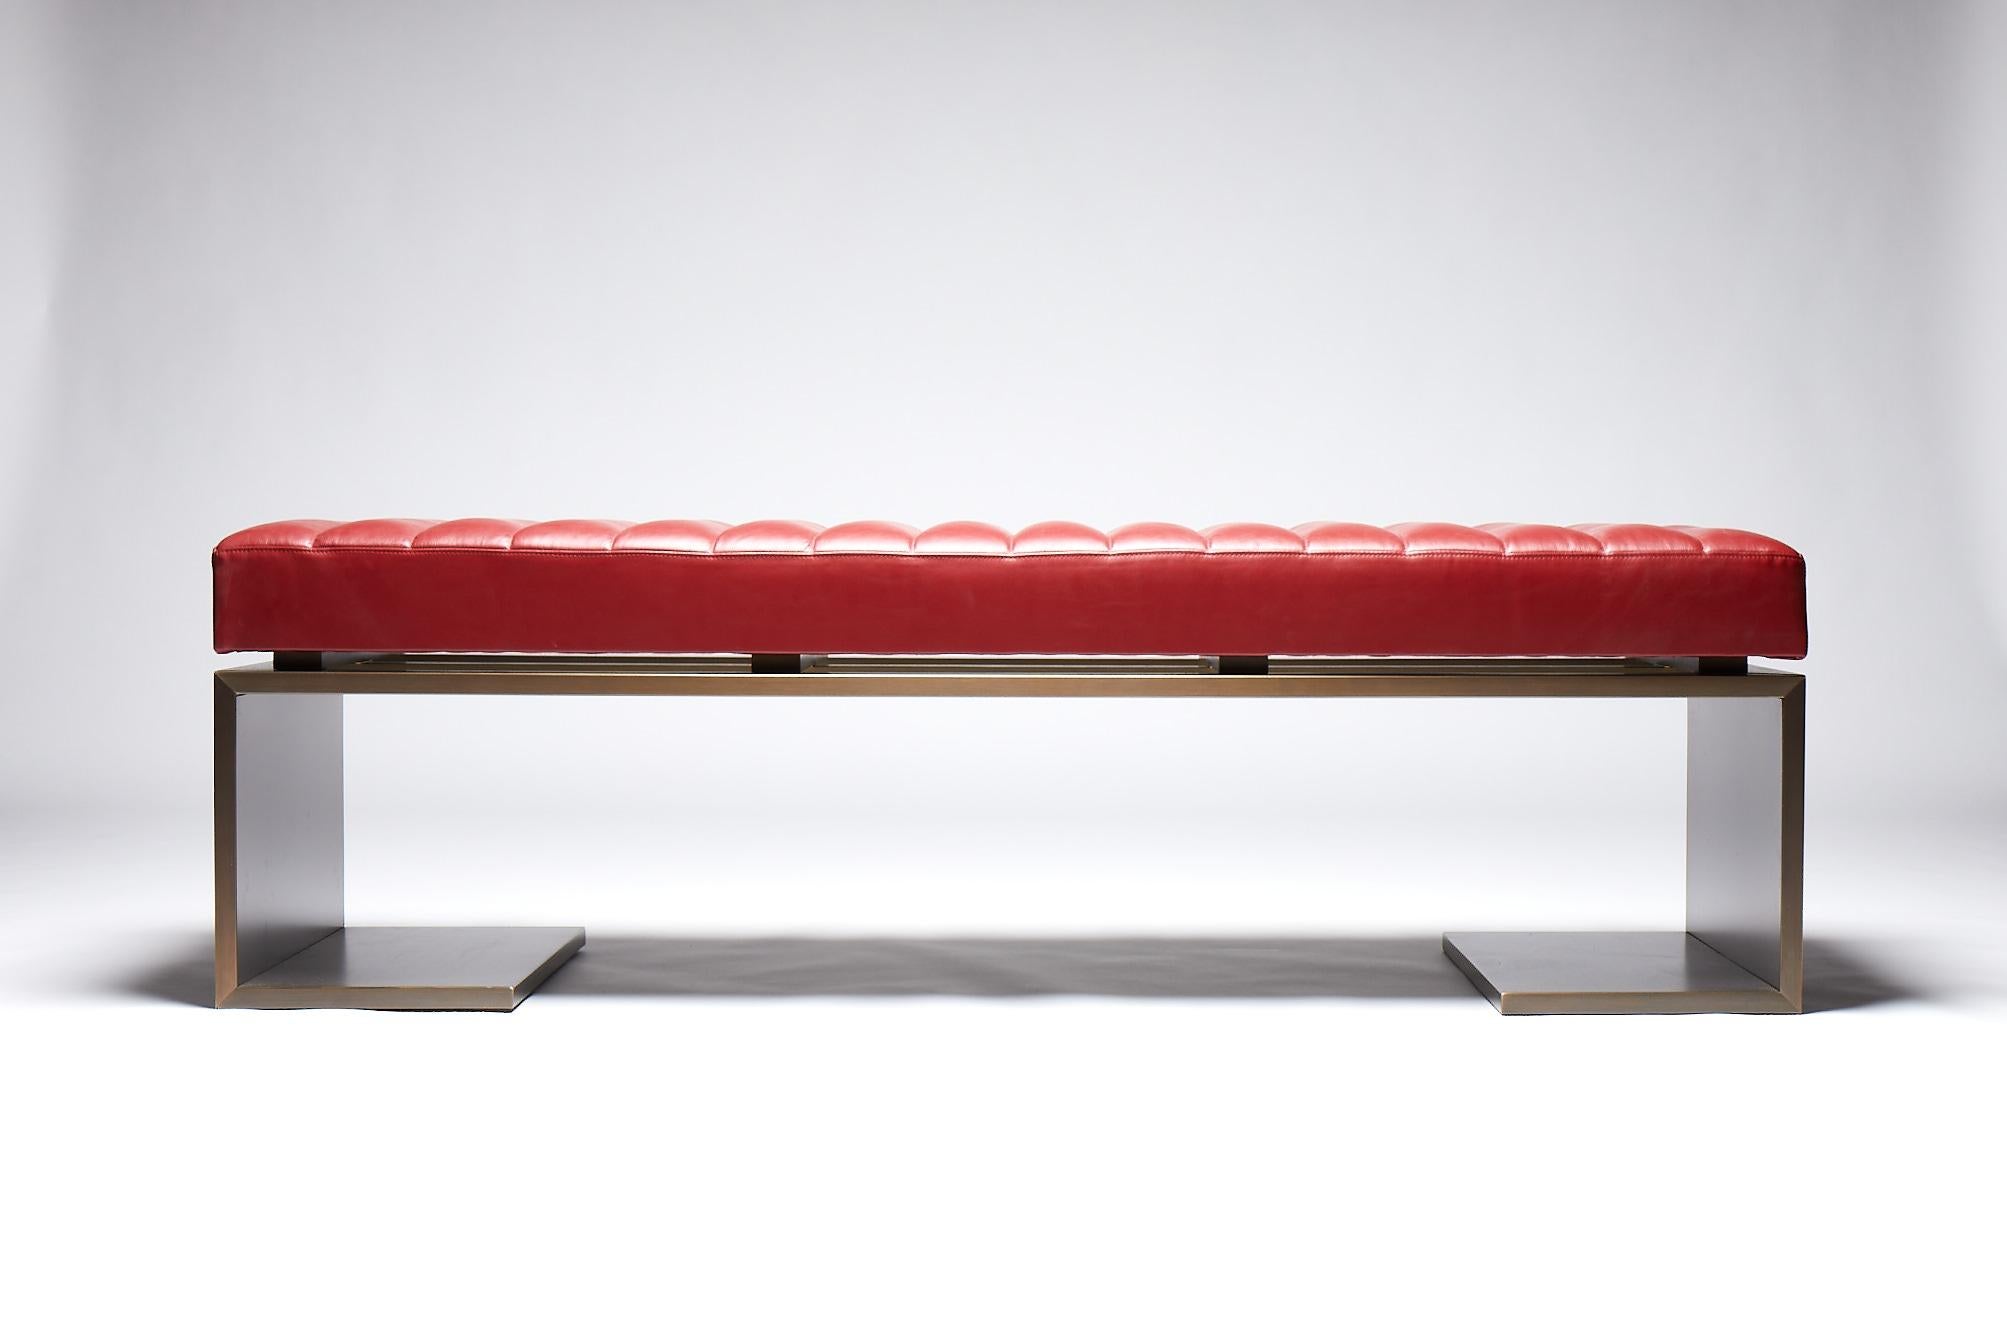 The Gallery collection showcases exclusive designs by Reda Amalou.
The pieces are crafted by some of the best artisans around the world and are edited as a series of 8 and 4 artist’s proofs. 
Each piece is signed and numbered.

The Kimani bench is a